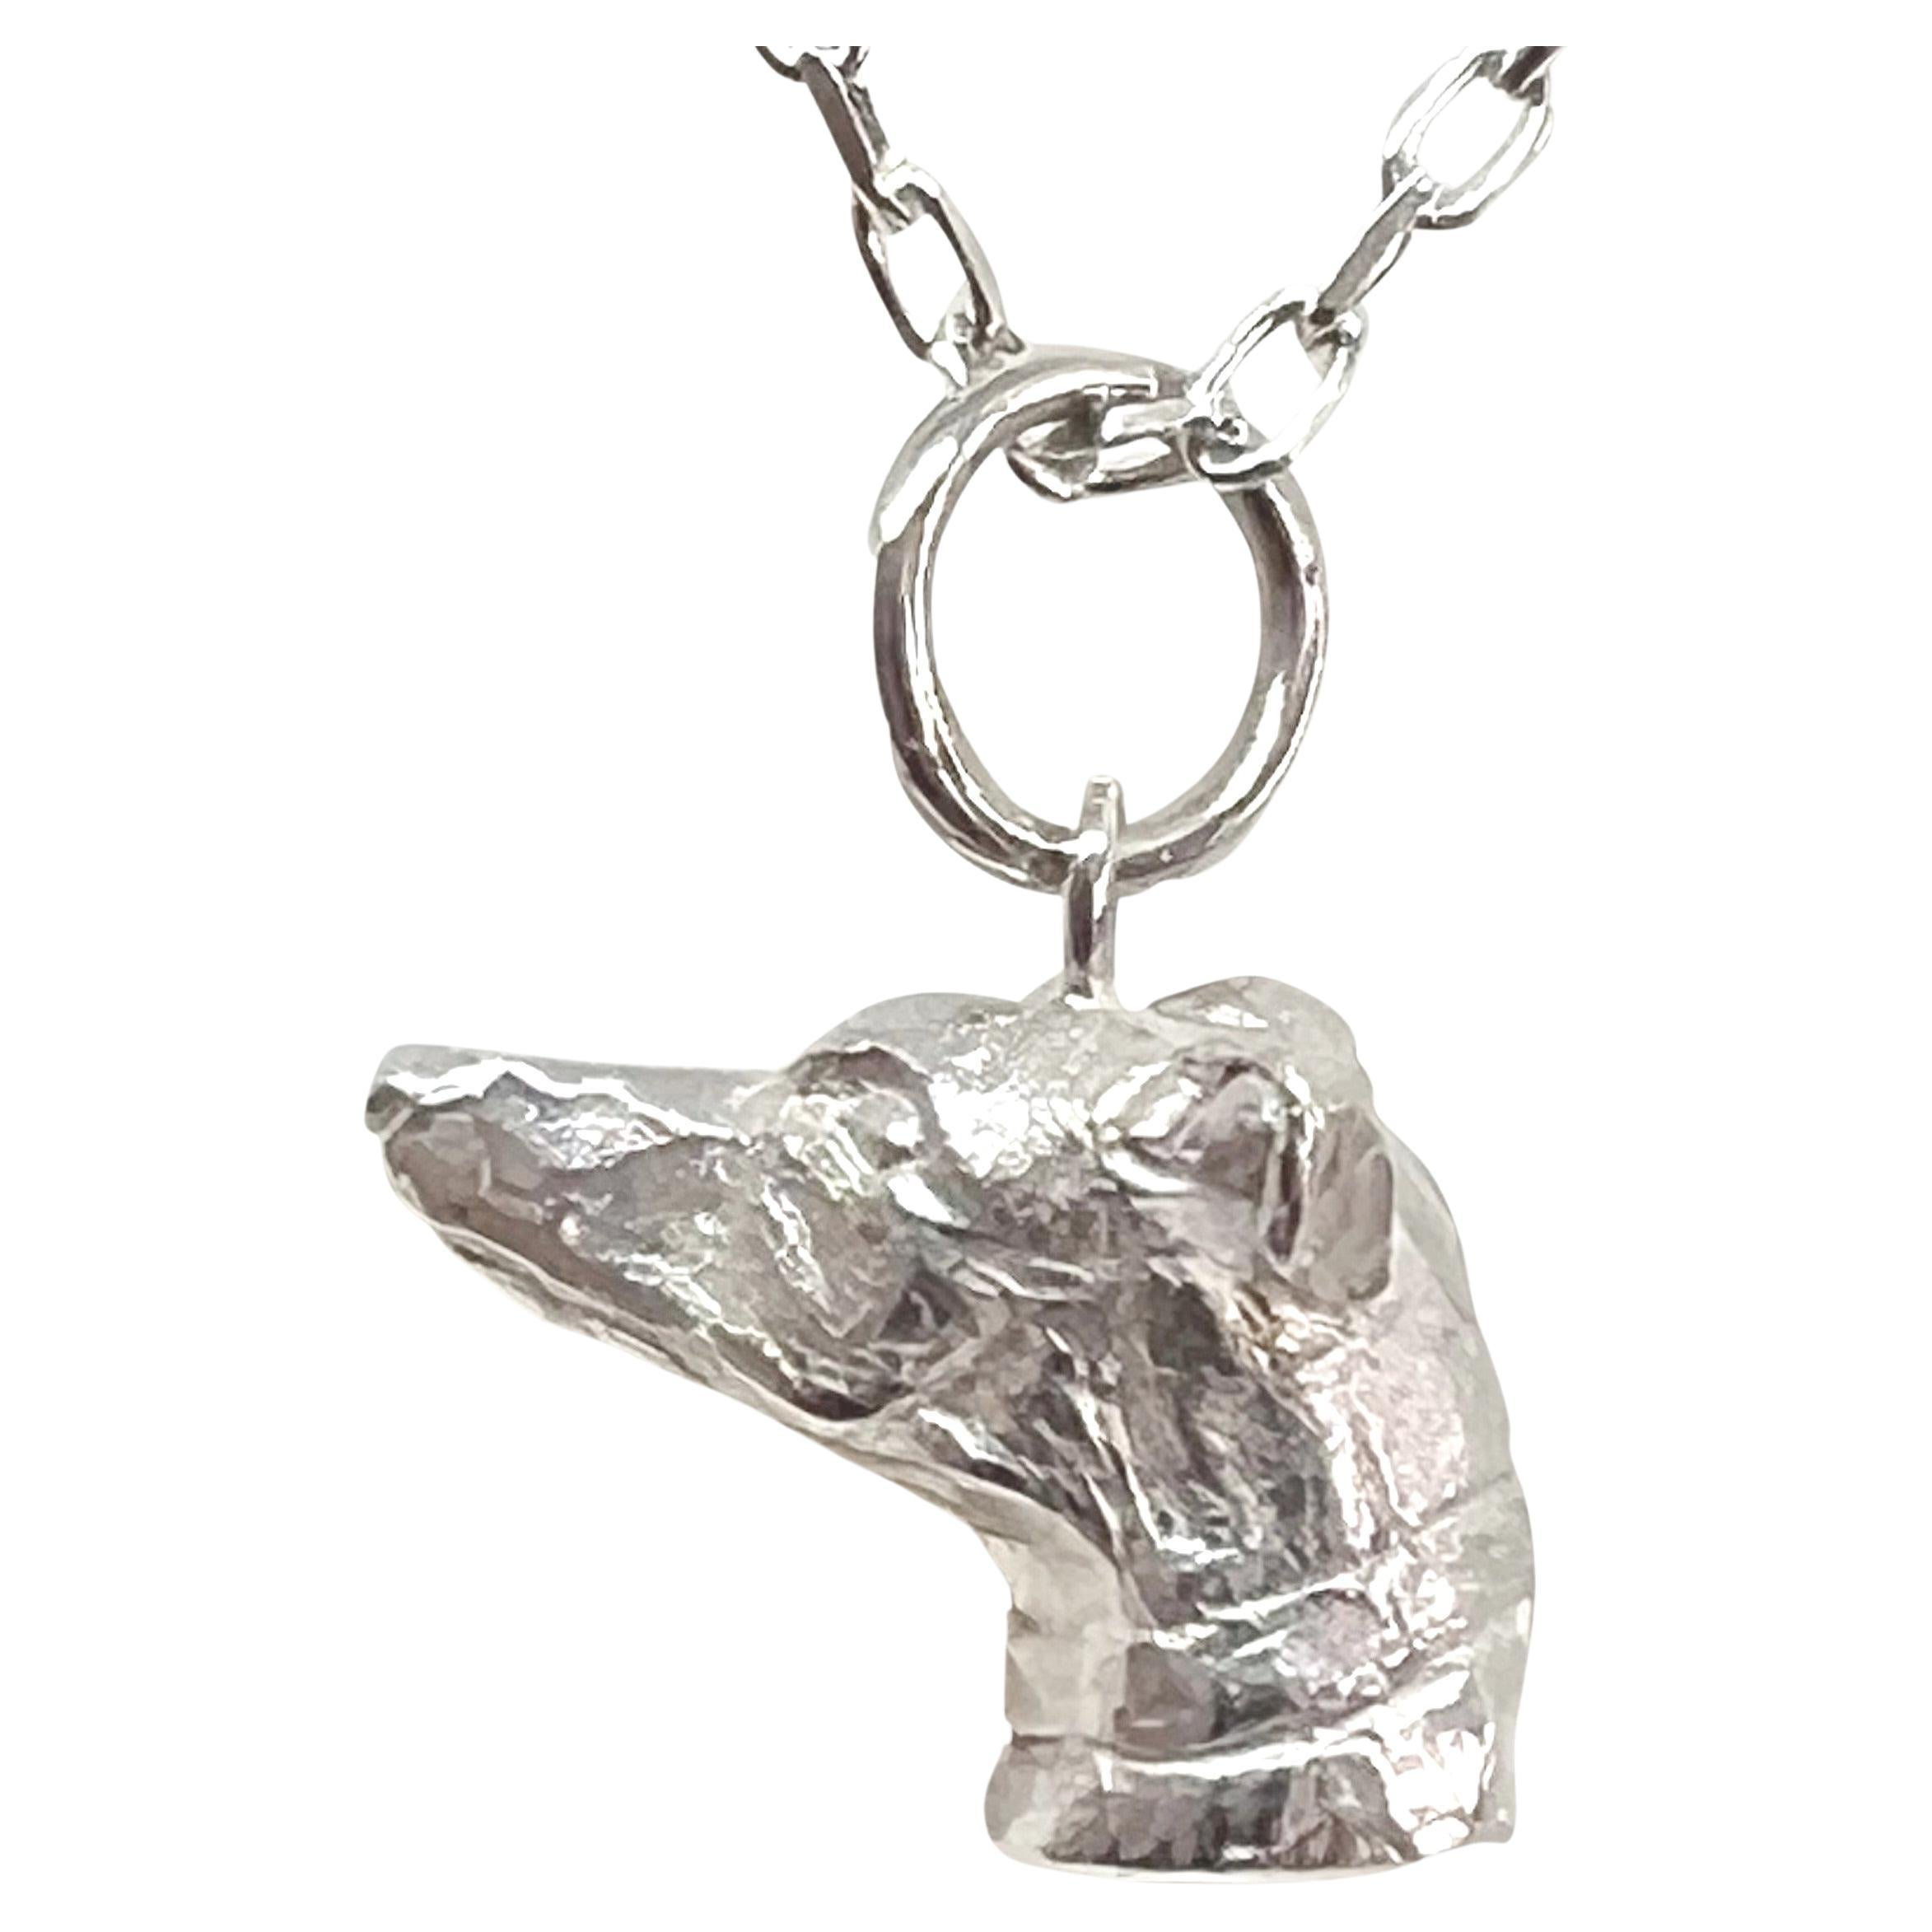 Paul Eaton 'England' Pendant Sterling Silver Miniature Greyhound Dog Head For Sale